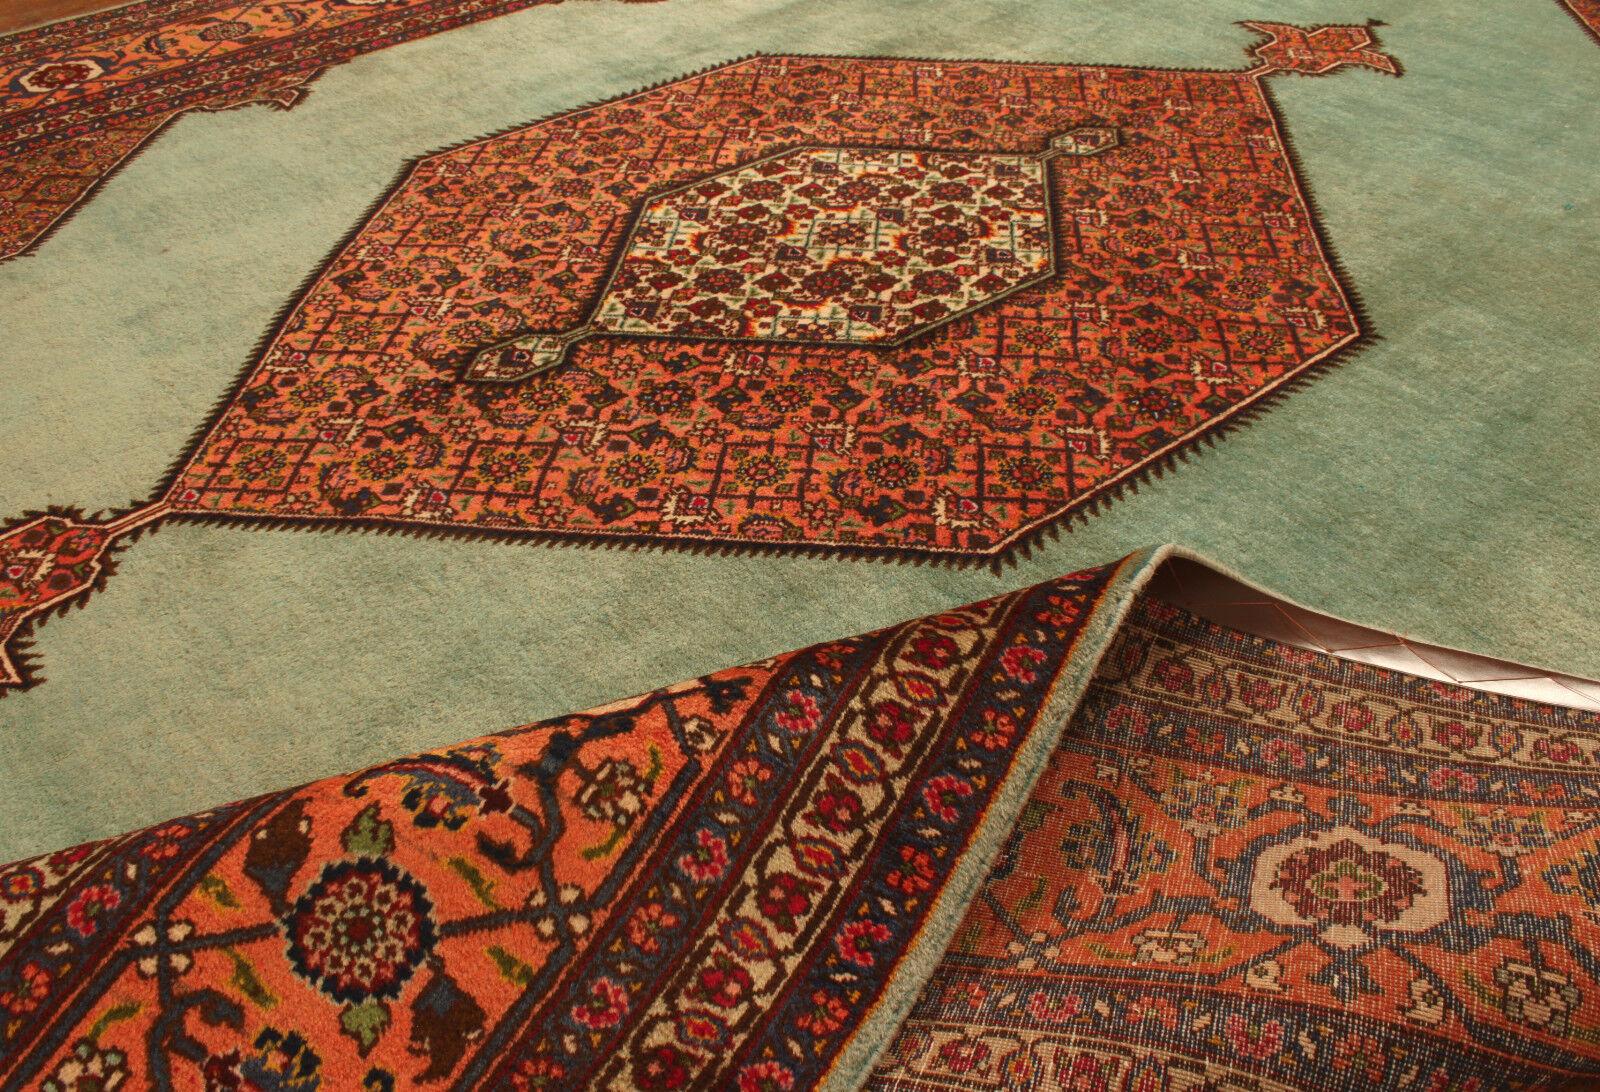 Handmade Vintage Persian Style Tabriz Rug 9.6' x 13.2', 1970s - 1T42 For Sale 1